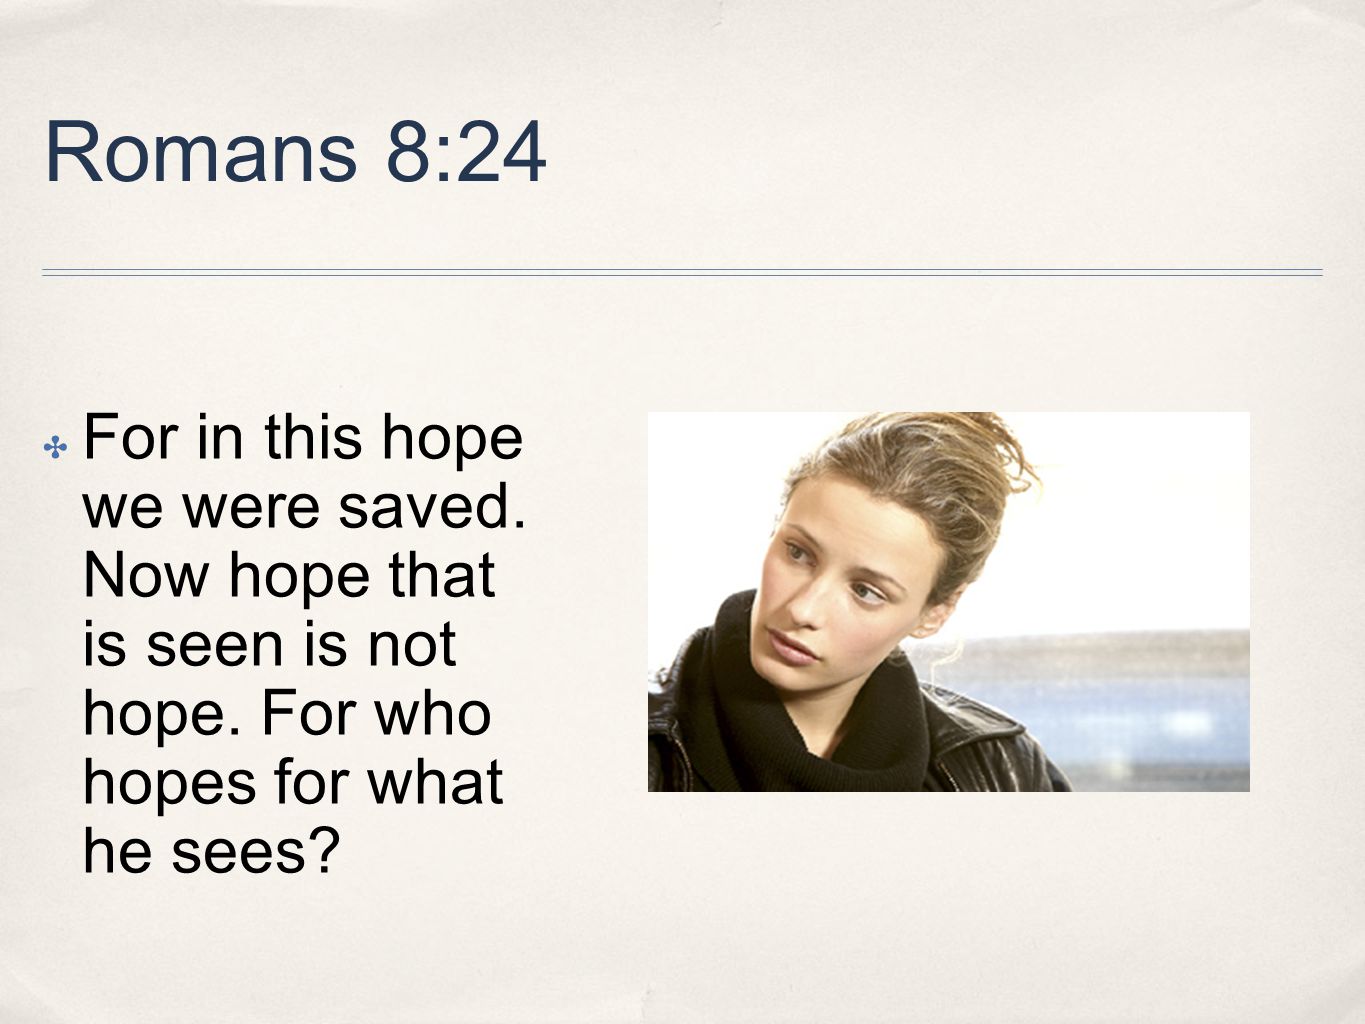 Romans 8:24 ✤ For in this hope we were saved. Now hope that is seen is not hope.